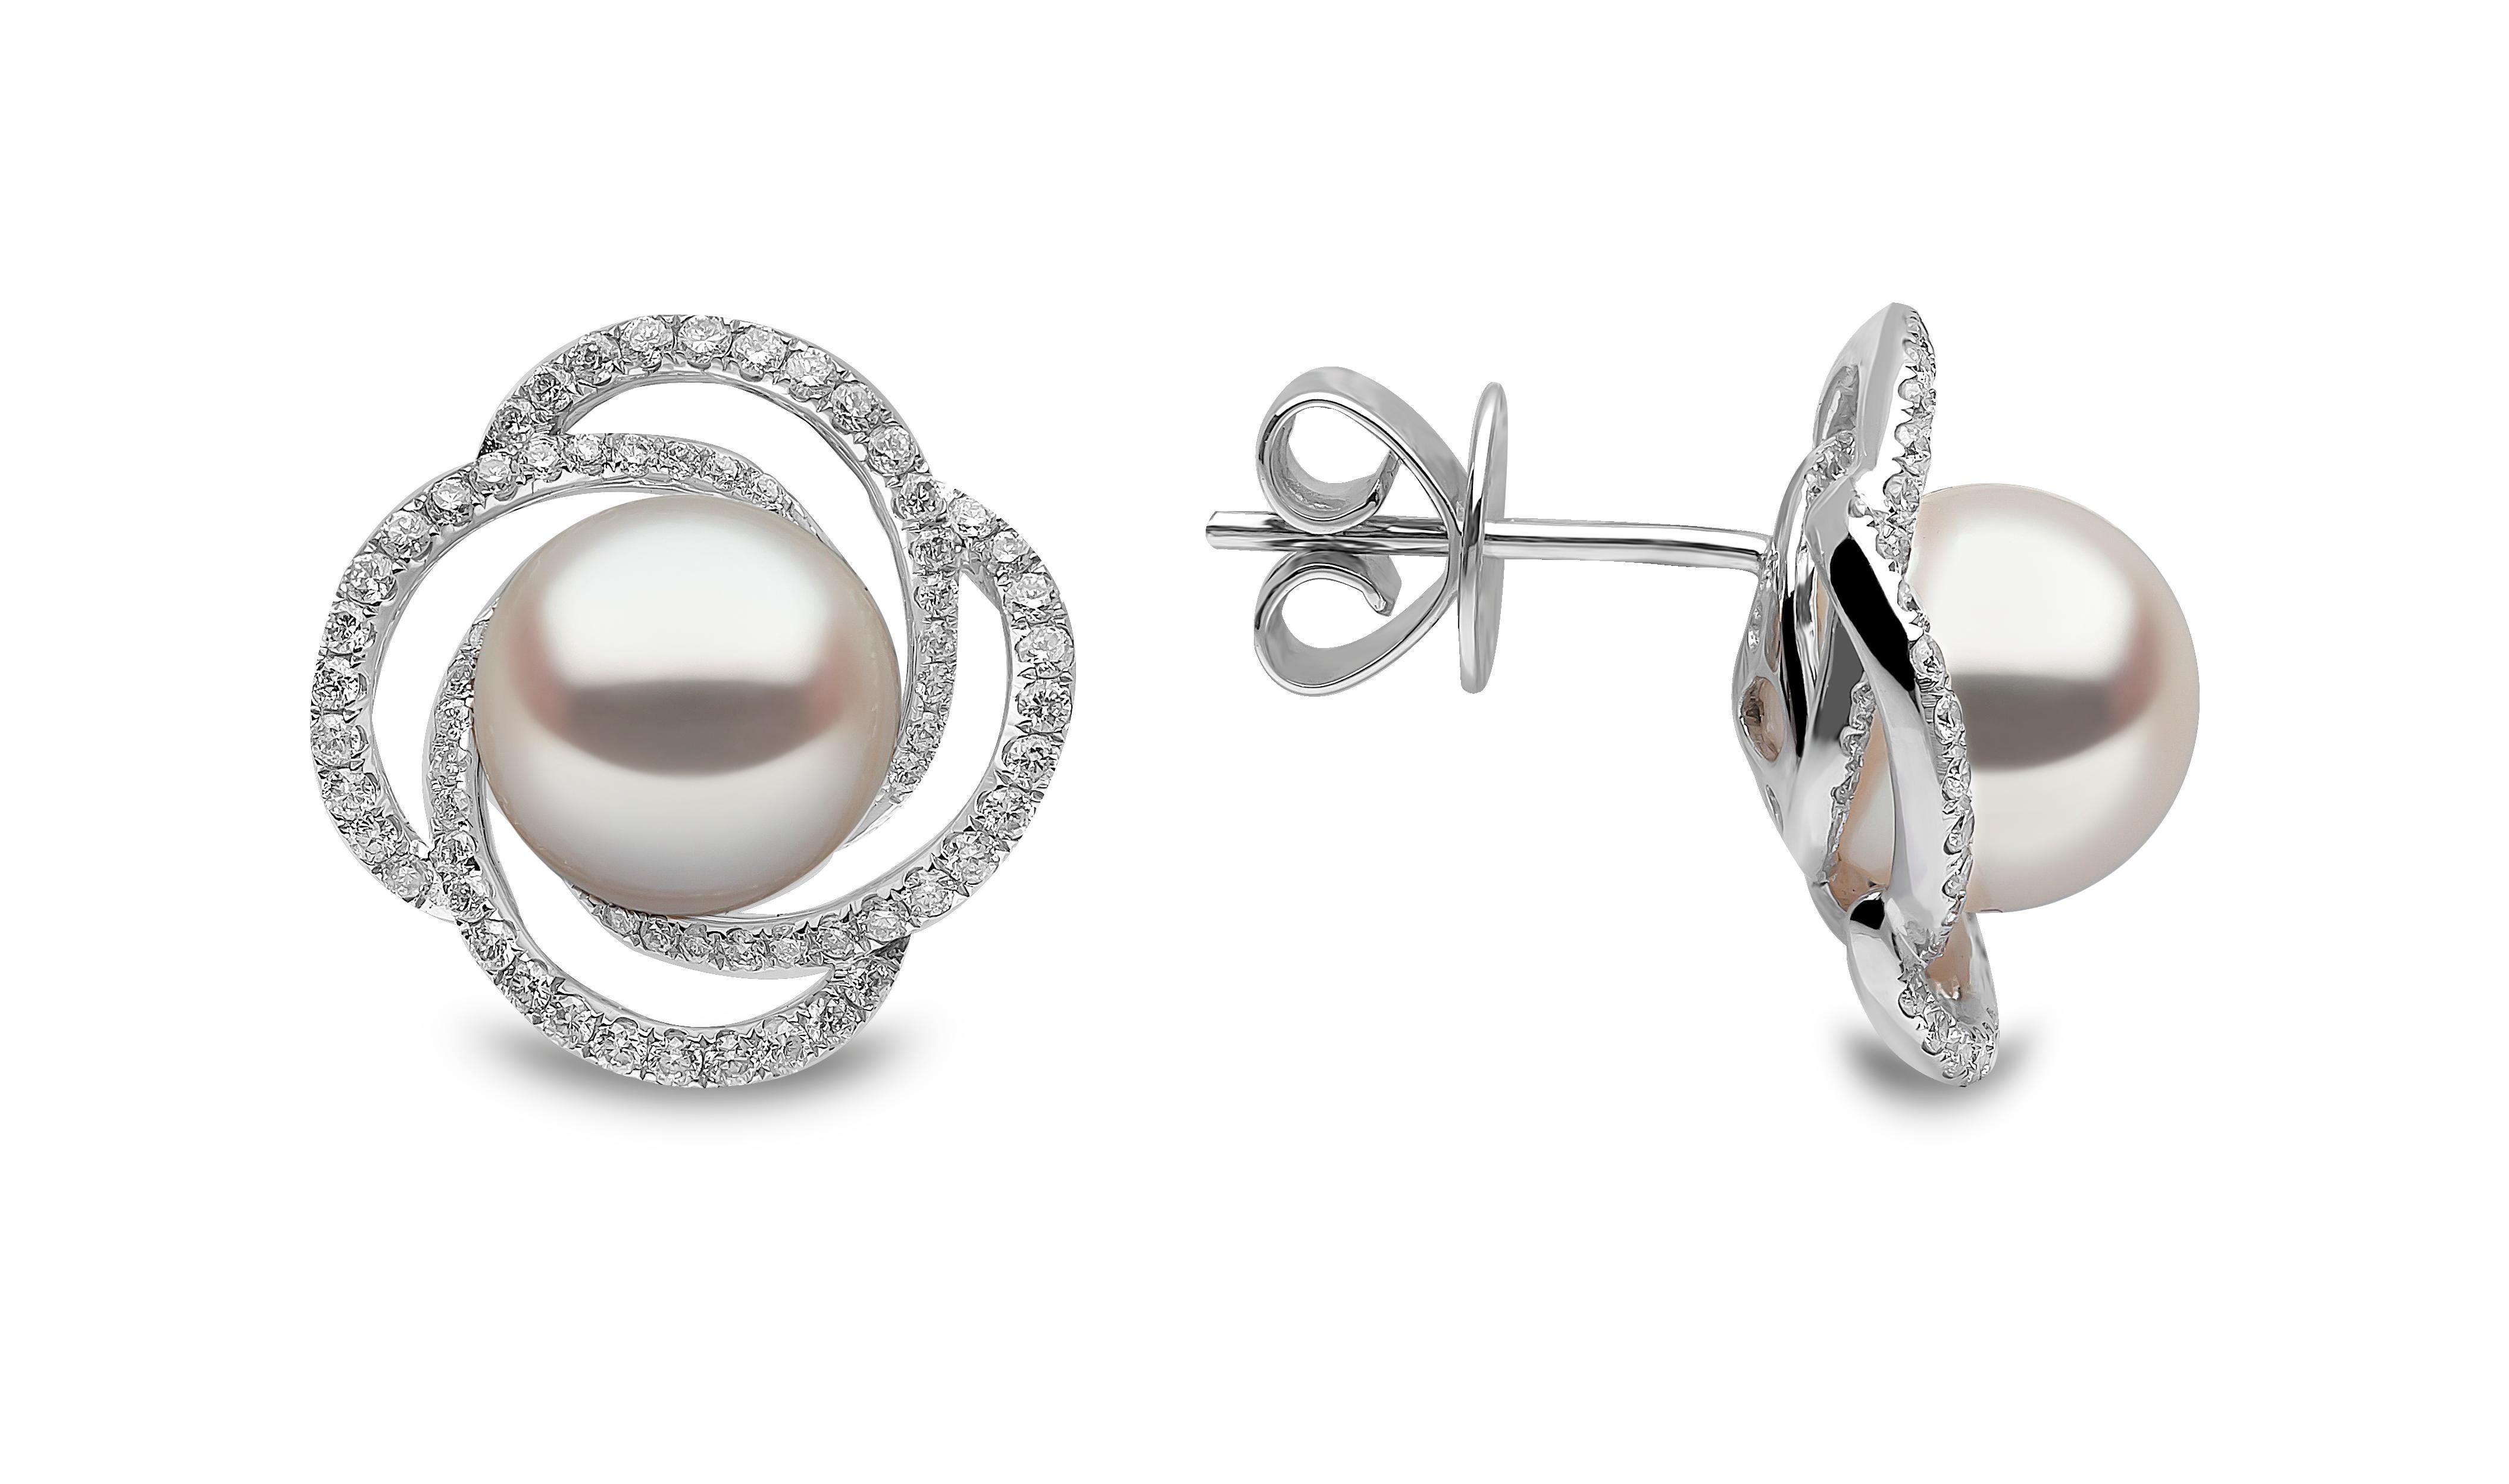 These lovely earrings by Yoko London feature lustrous freshwater pearls at the centre of a diamond floral-motif. An elegant design that exudes a timeless elegance, these delicate earrings will make a wonderful addition to any jewellery box and will